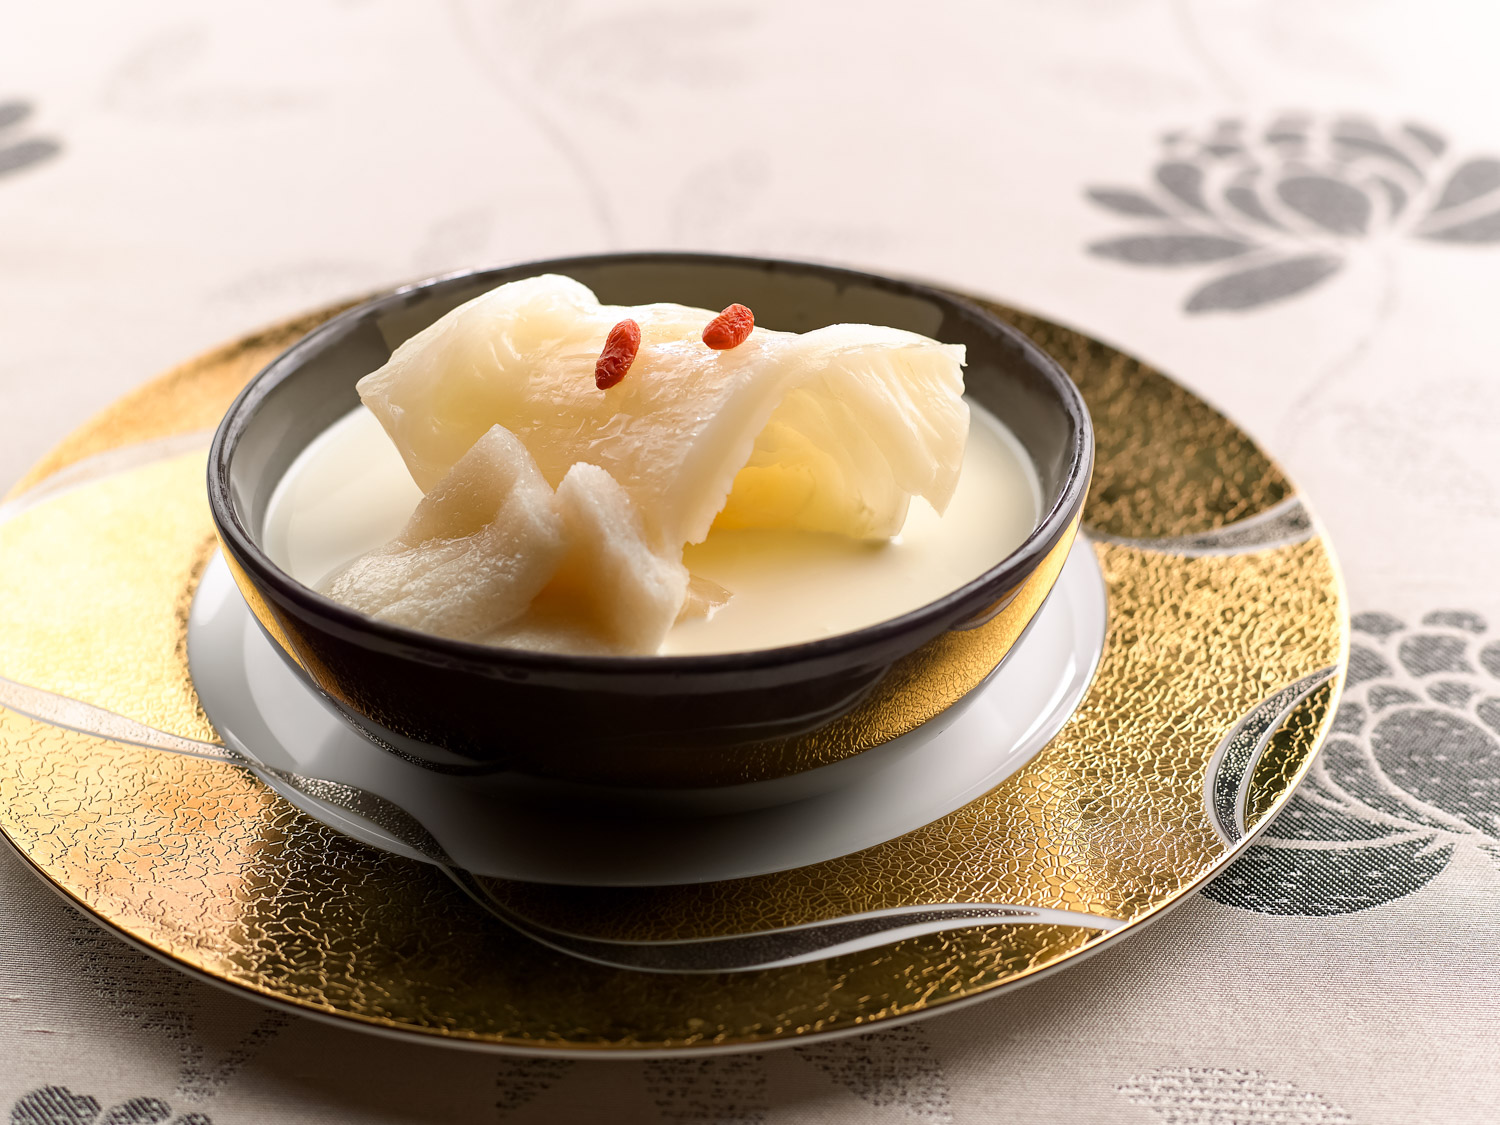 Double-boiled Fish Maw with Bamboo Pith in Fish Bone Broth (竹笙花胶鱼骨汤)